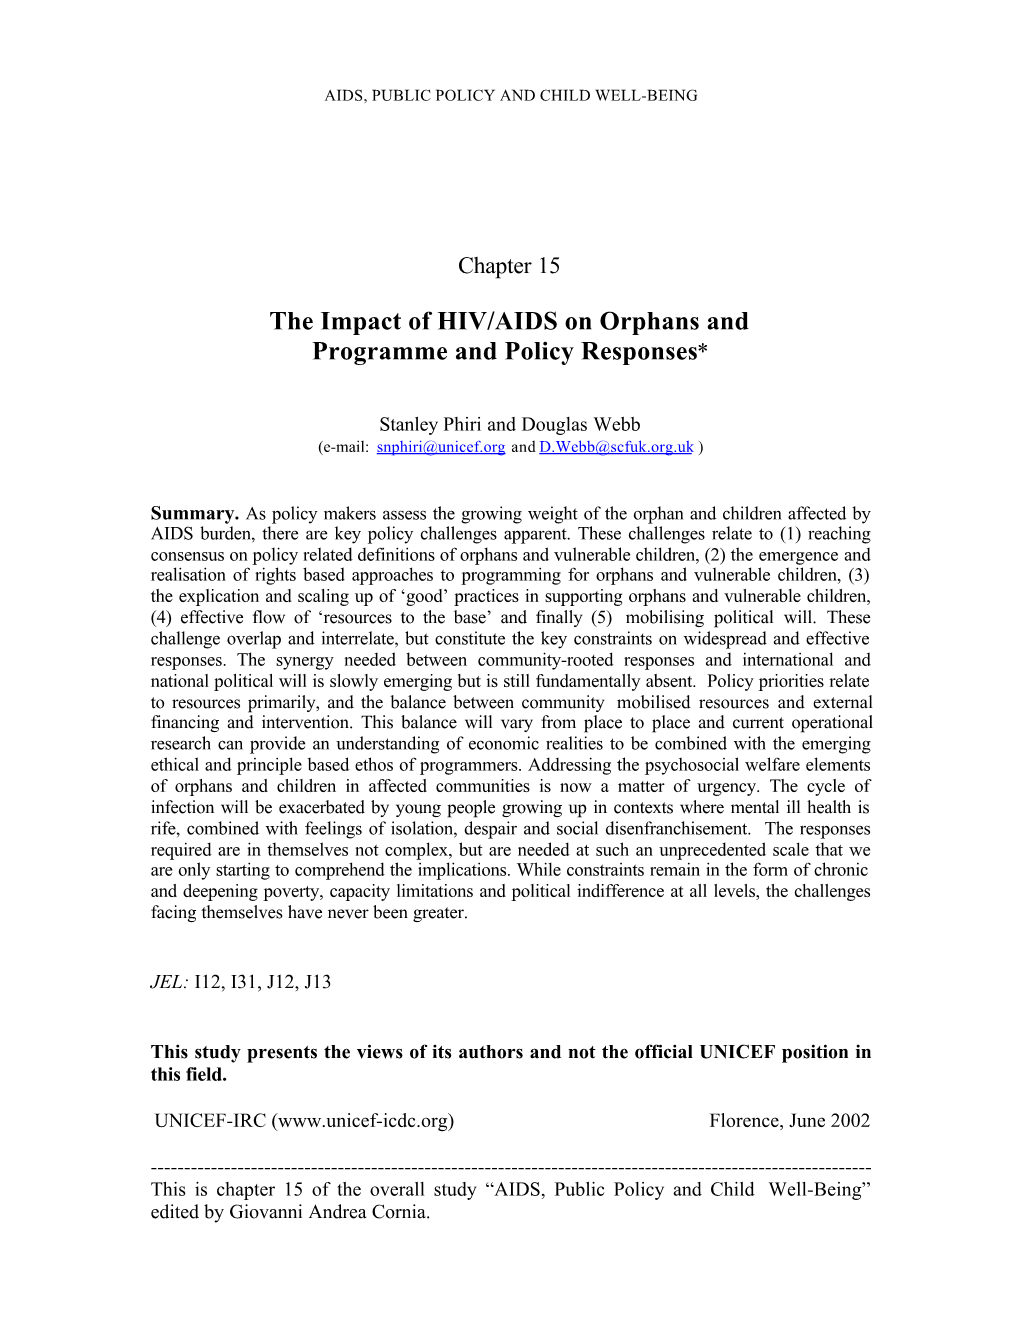 The Impact of HIV/AIDS on Orphans and Programme and Policy Responses*